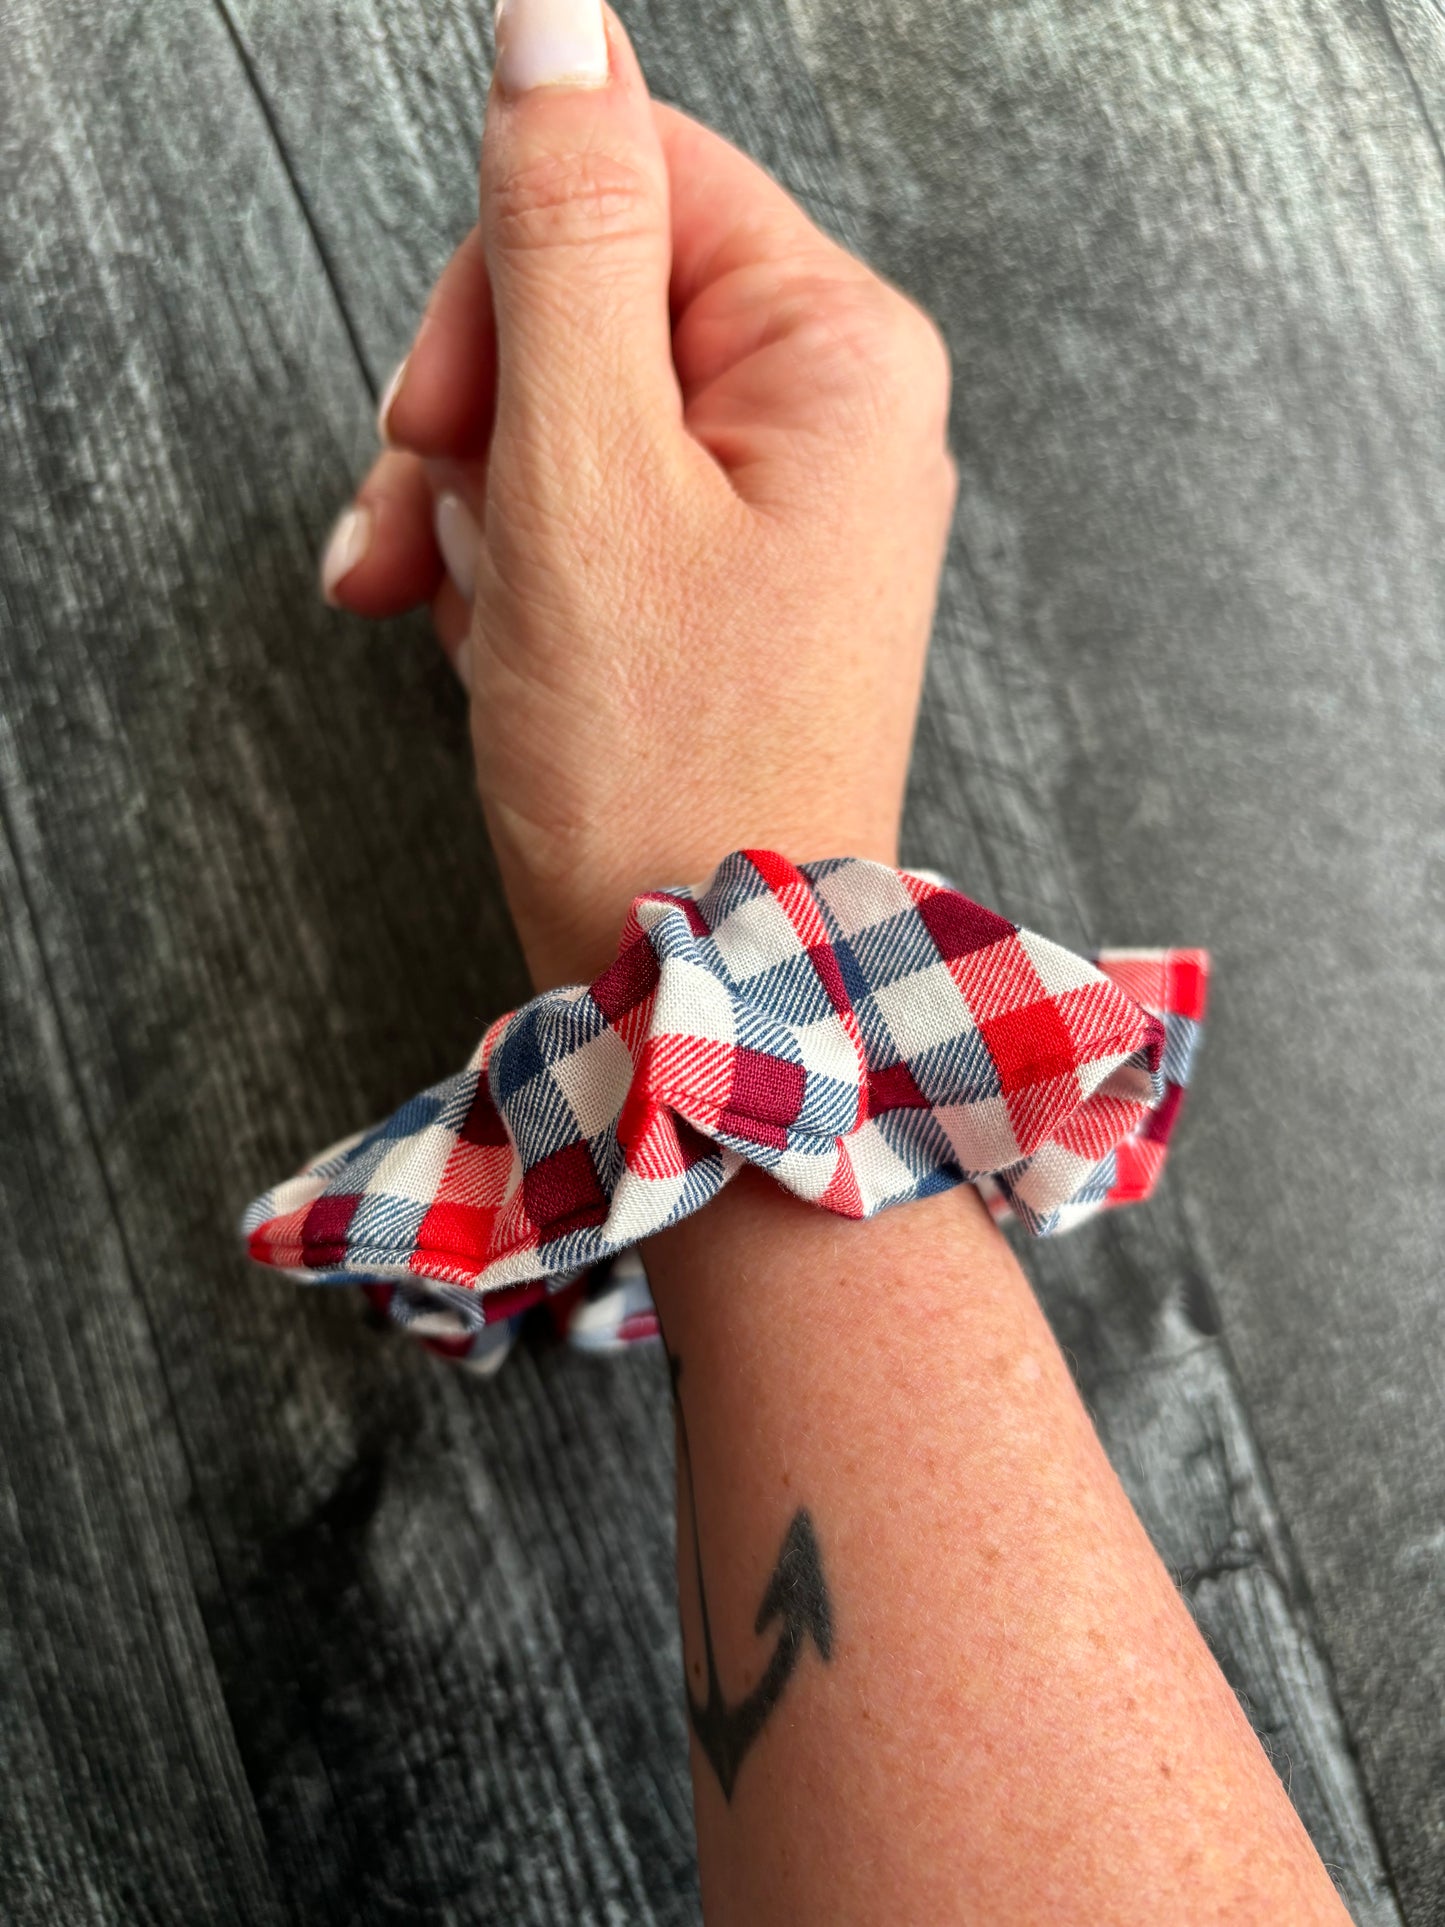 Red, White, and Blue Gingham - Cotton Scrunchie